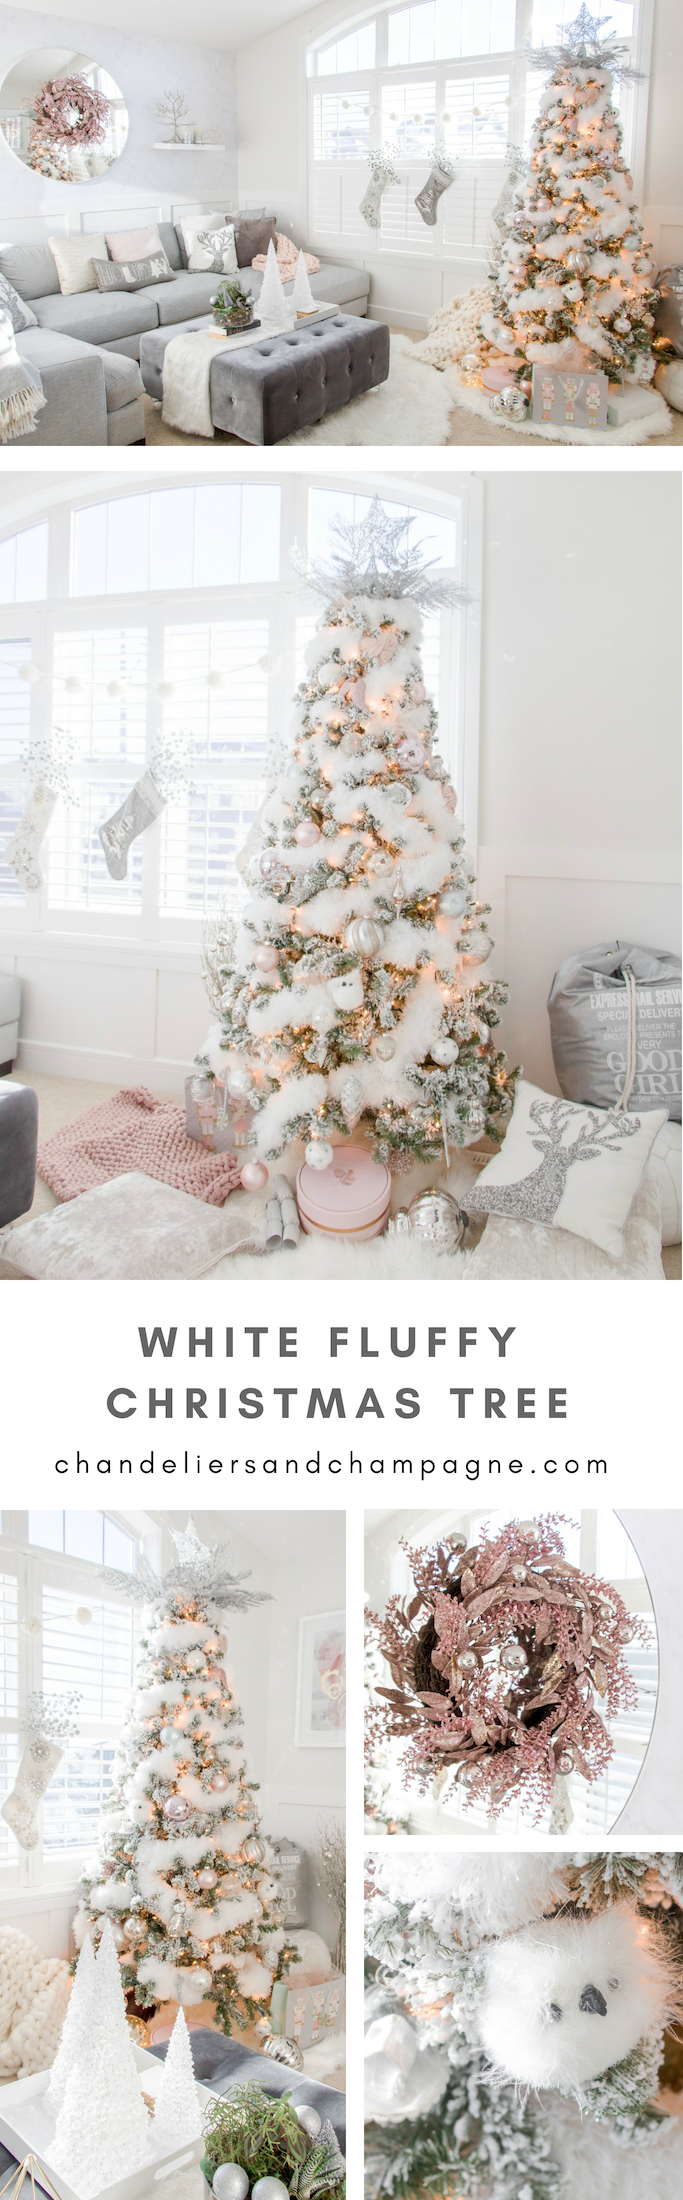 White feathered fluffy Christmas tree with pastel ornaments and light and bright living room Christmas decor - King of Christmas Prince Flock Tree